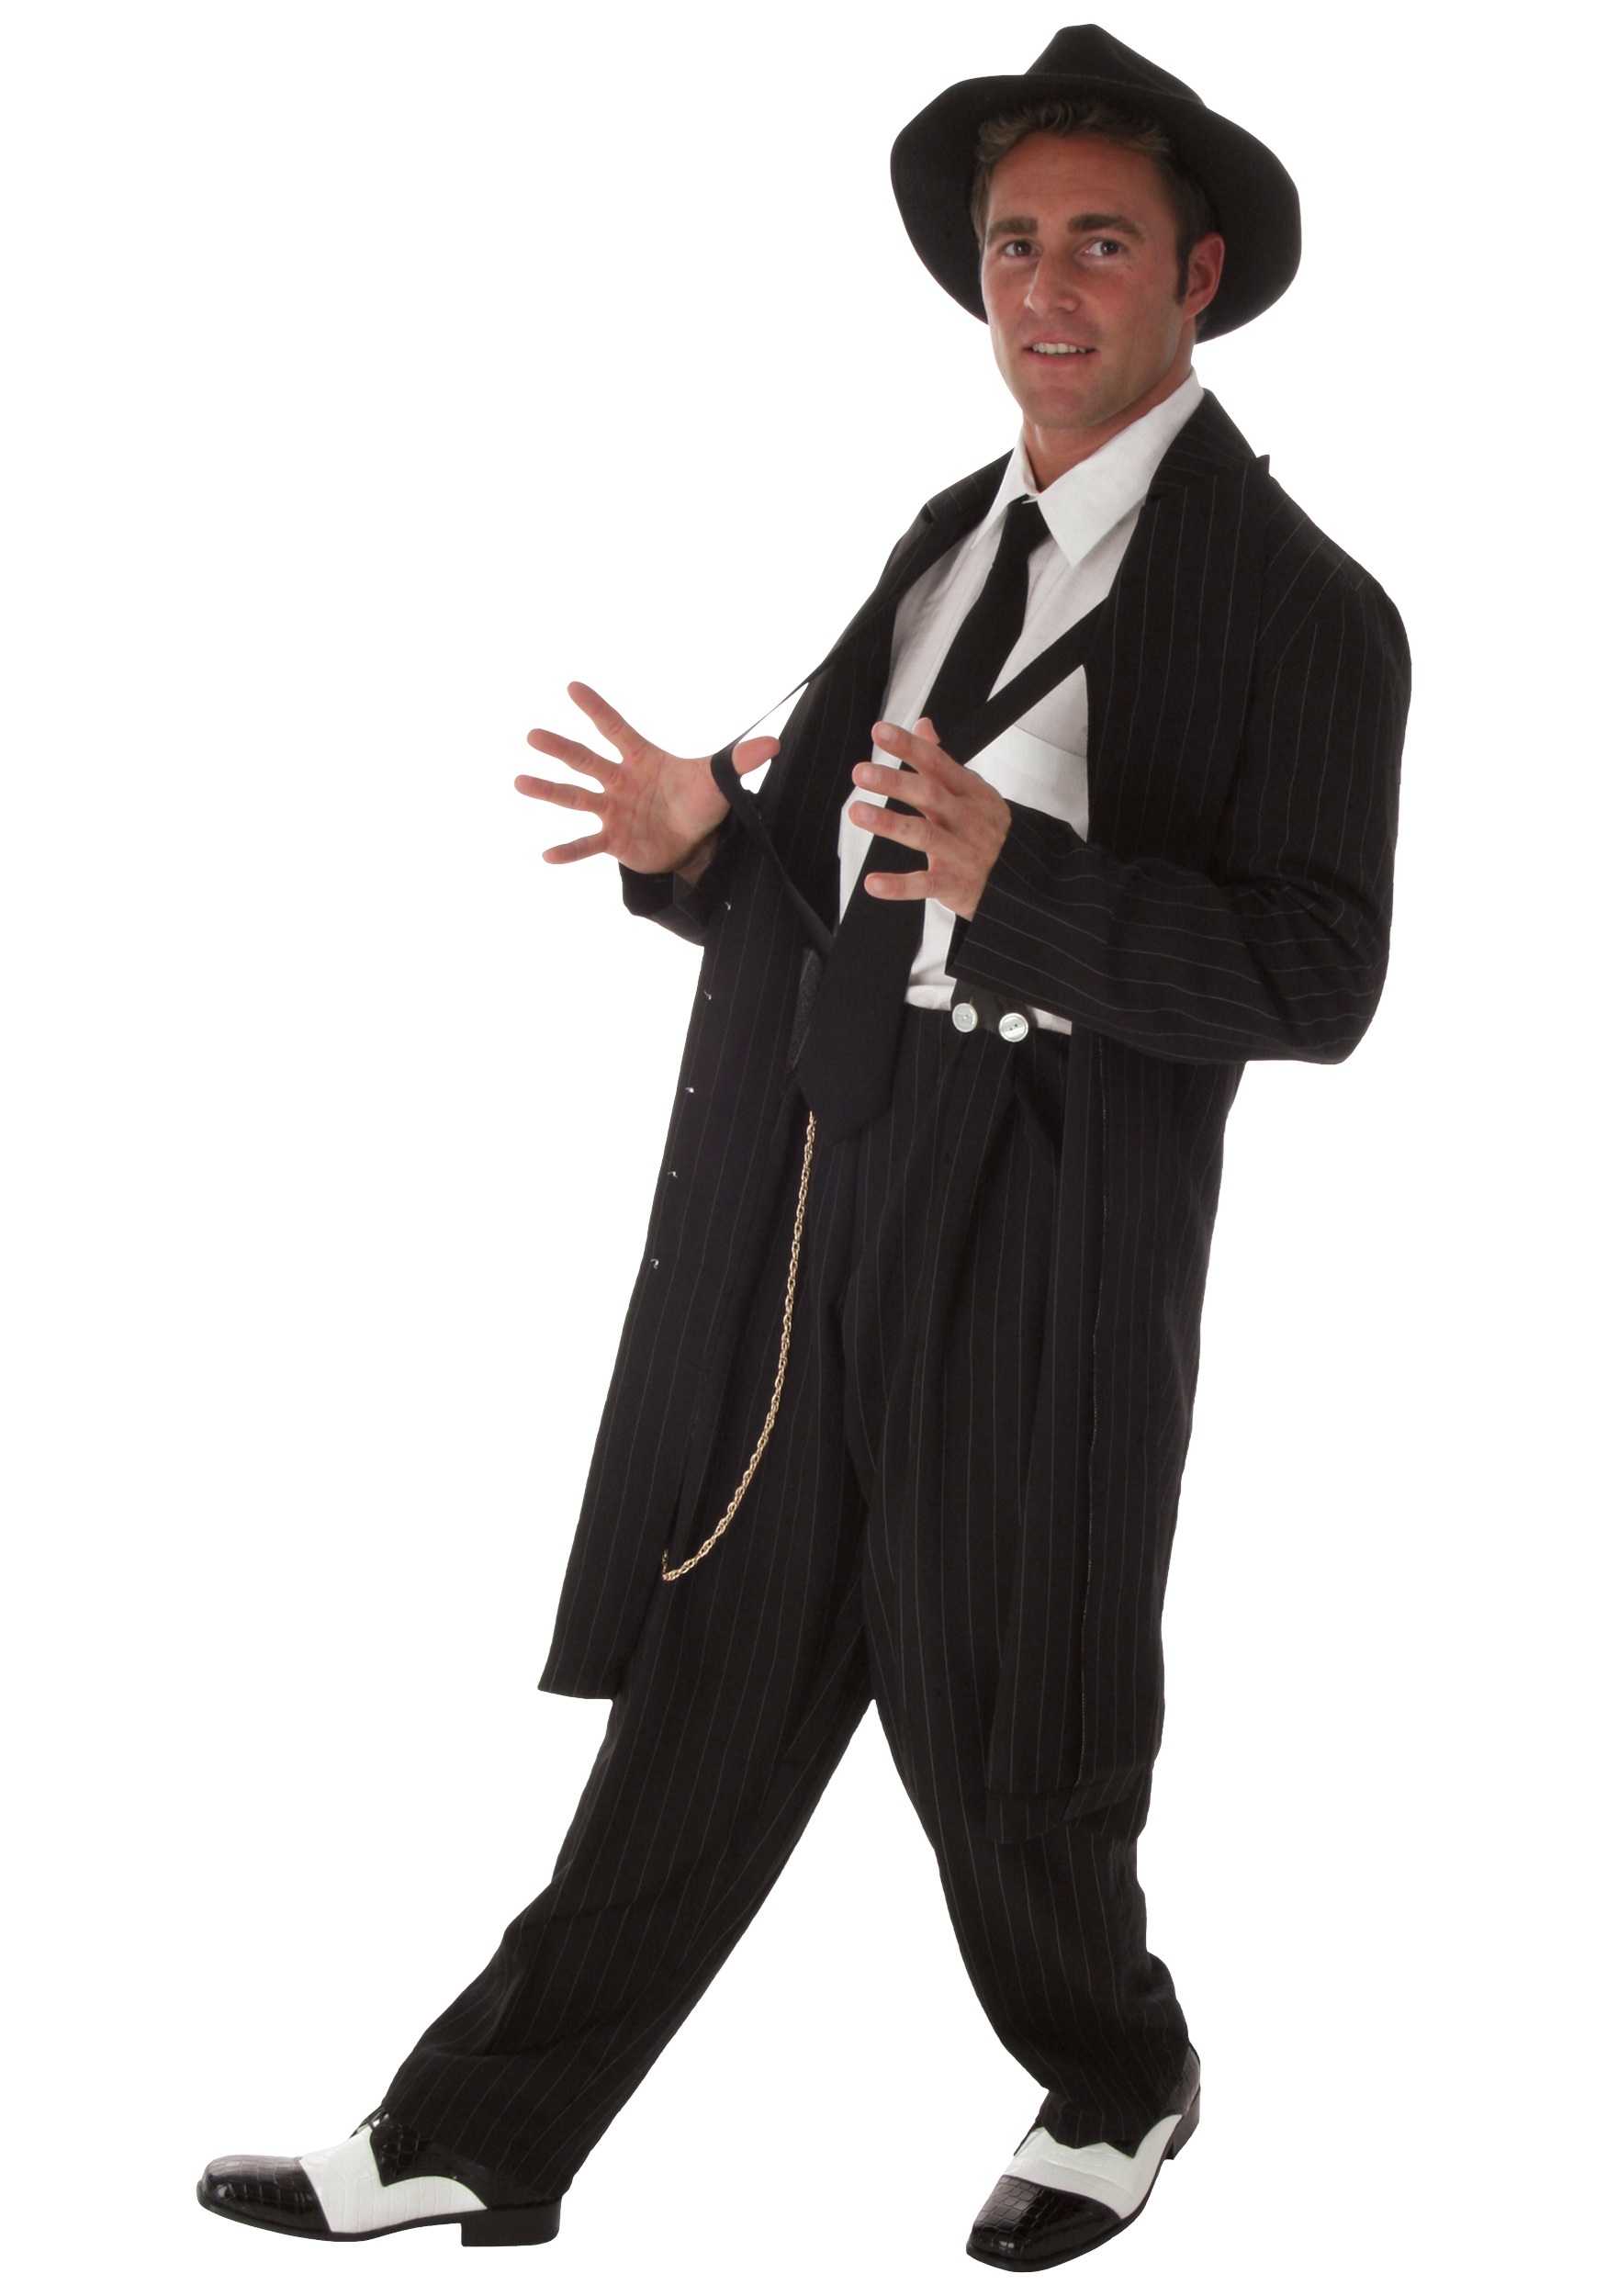 Black Zoot Suit Costume drawing free image download